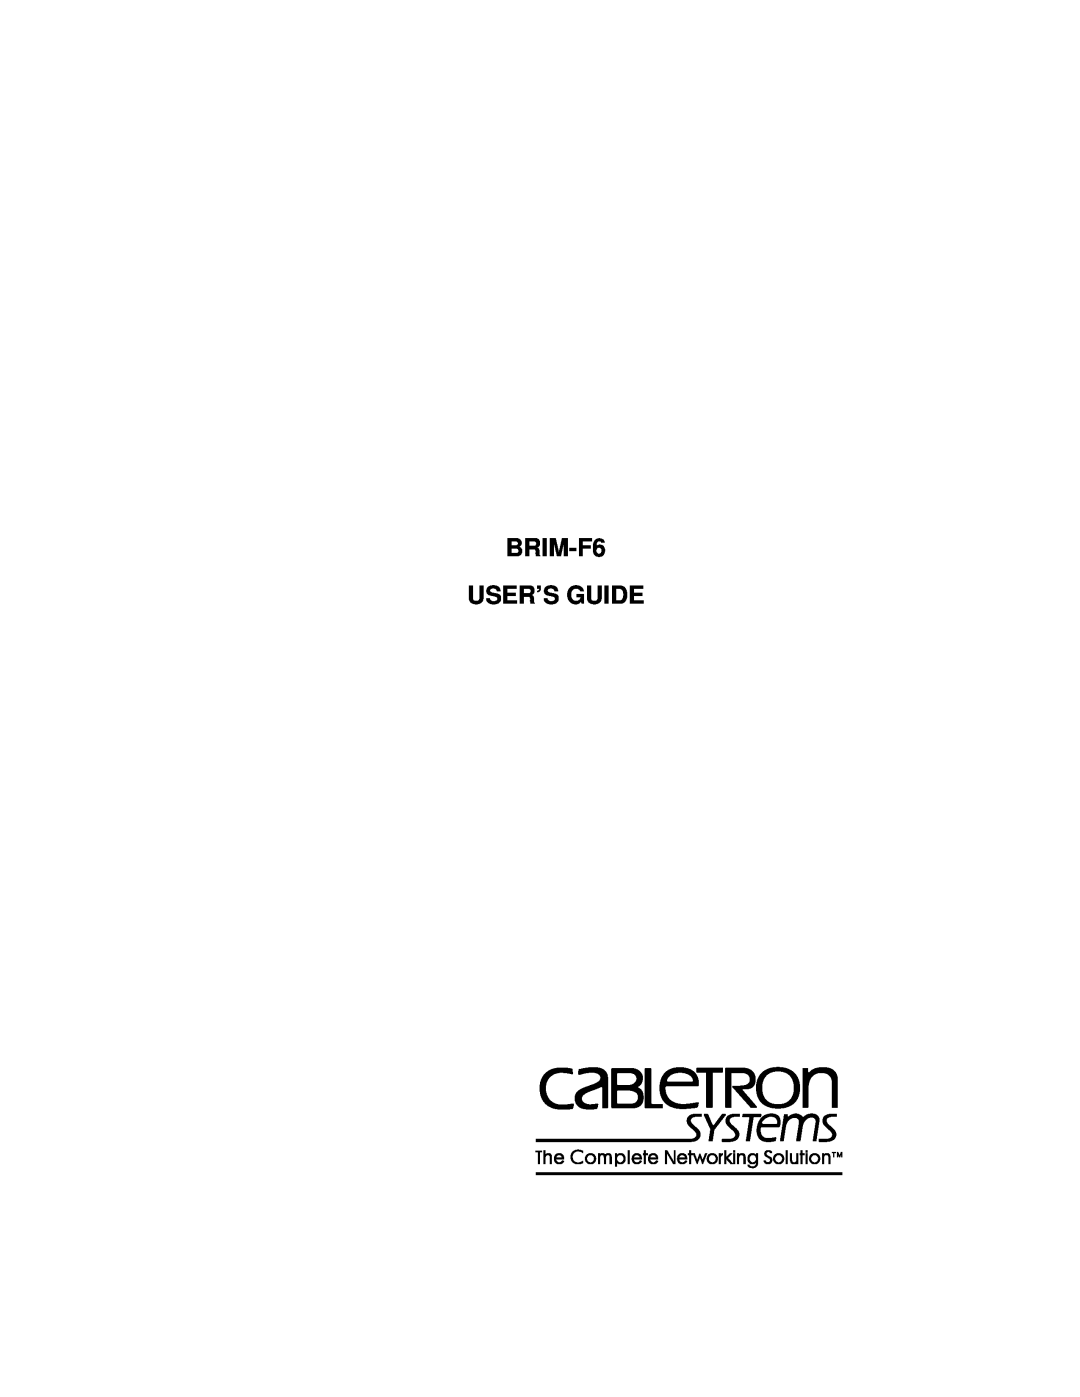 Cabletron Systems manual BRIM-F6 USER’S GUIDE 